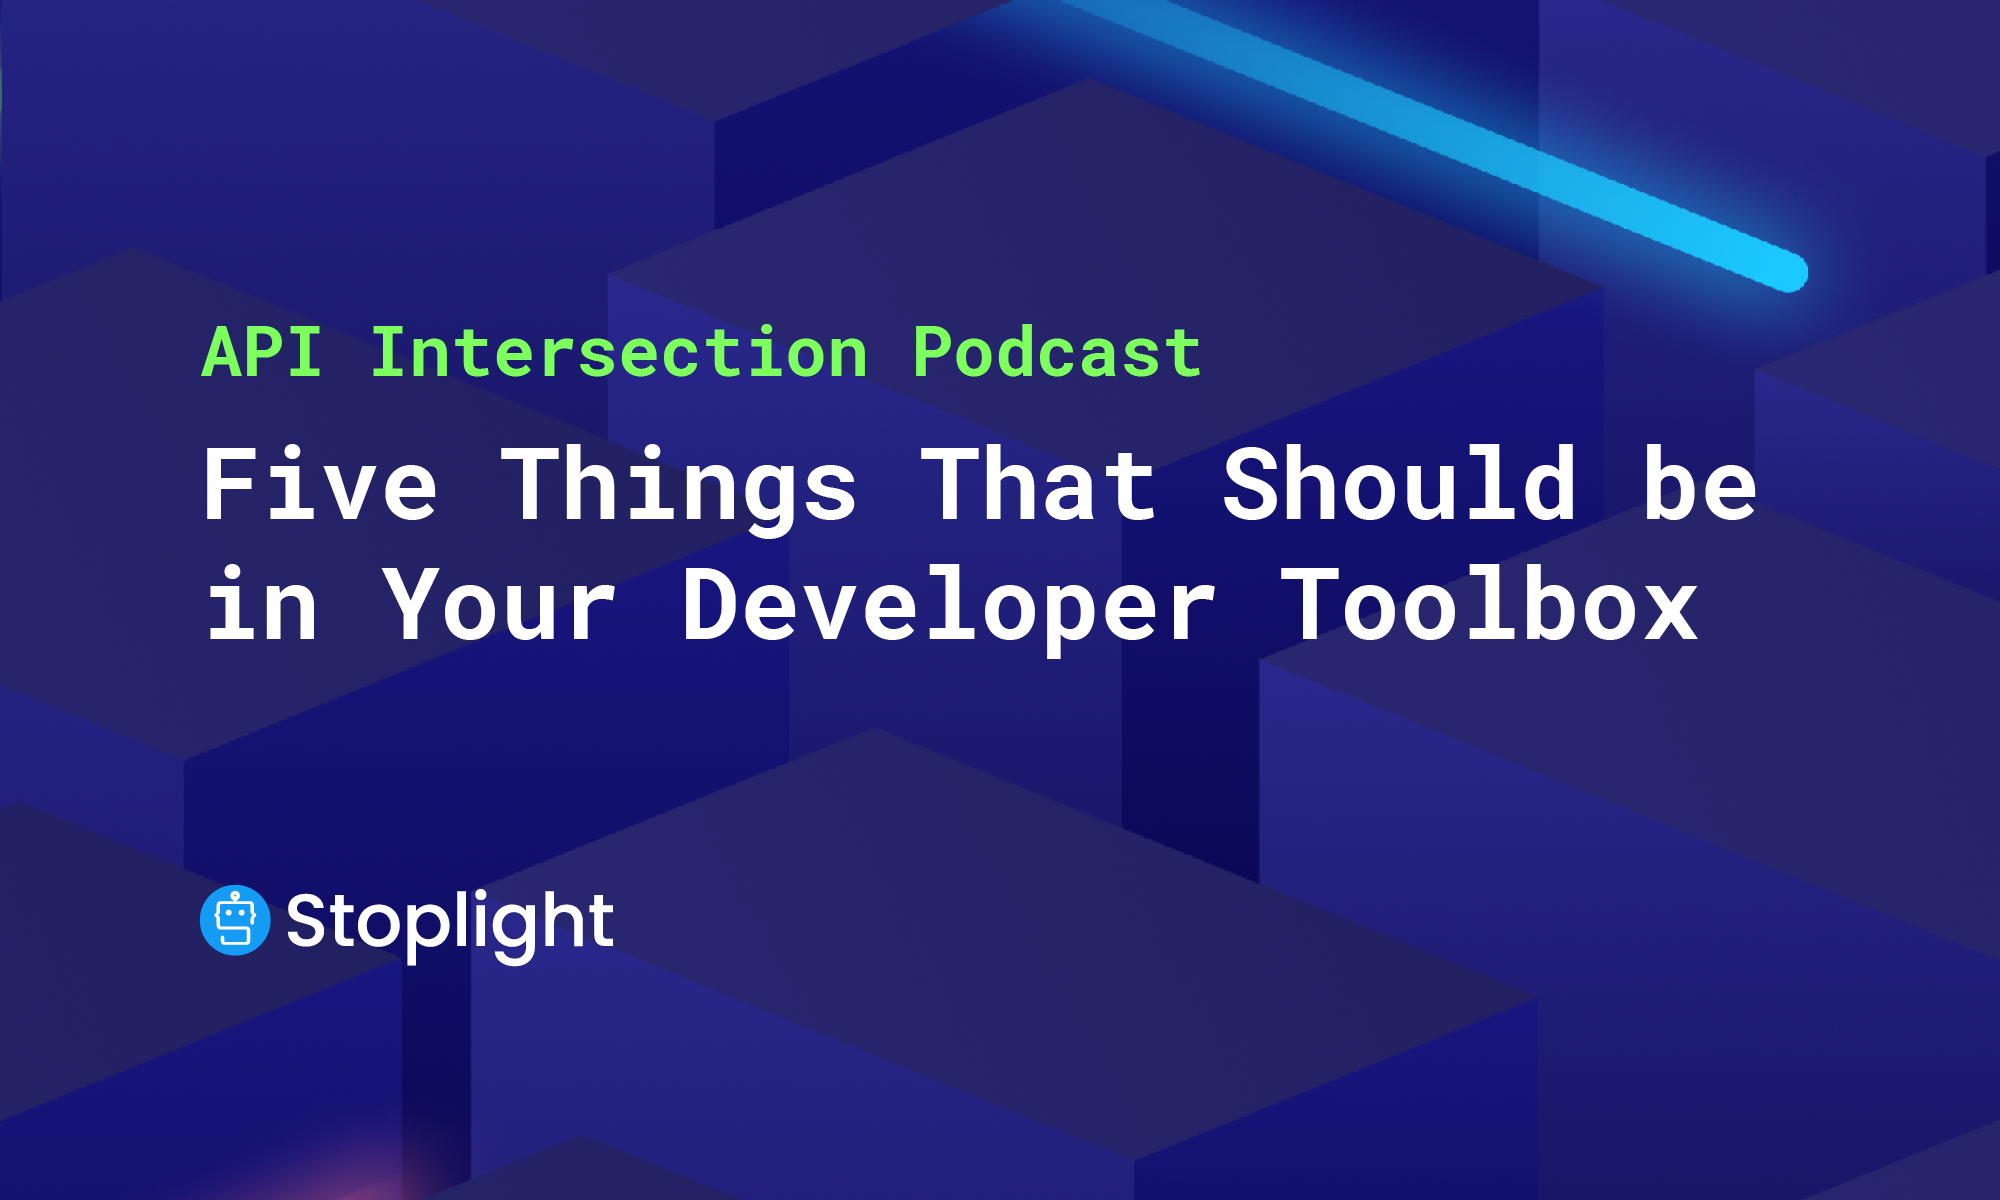 Five Things That Should be in Your Developer Toolbox